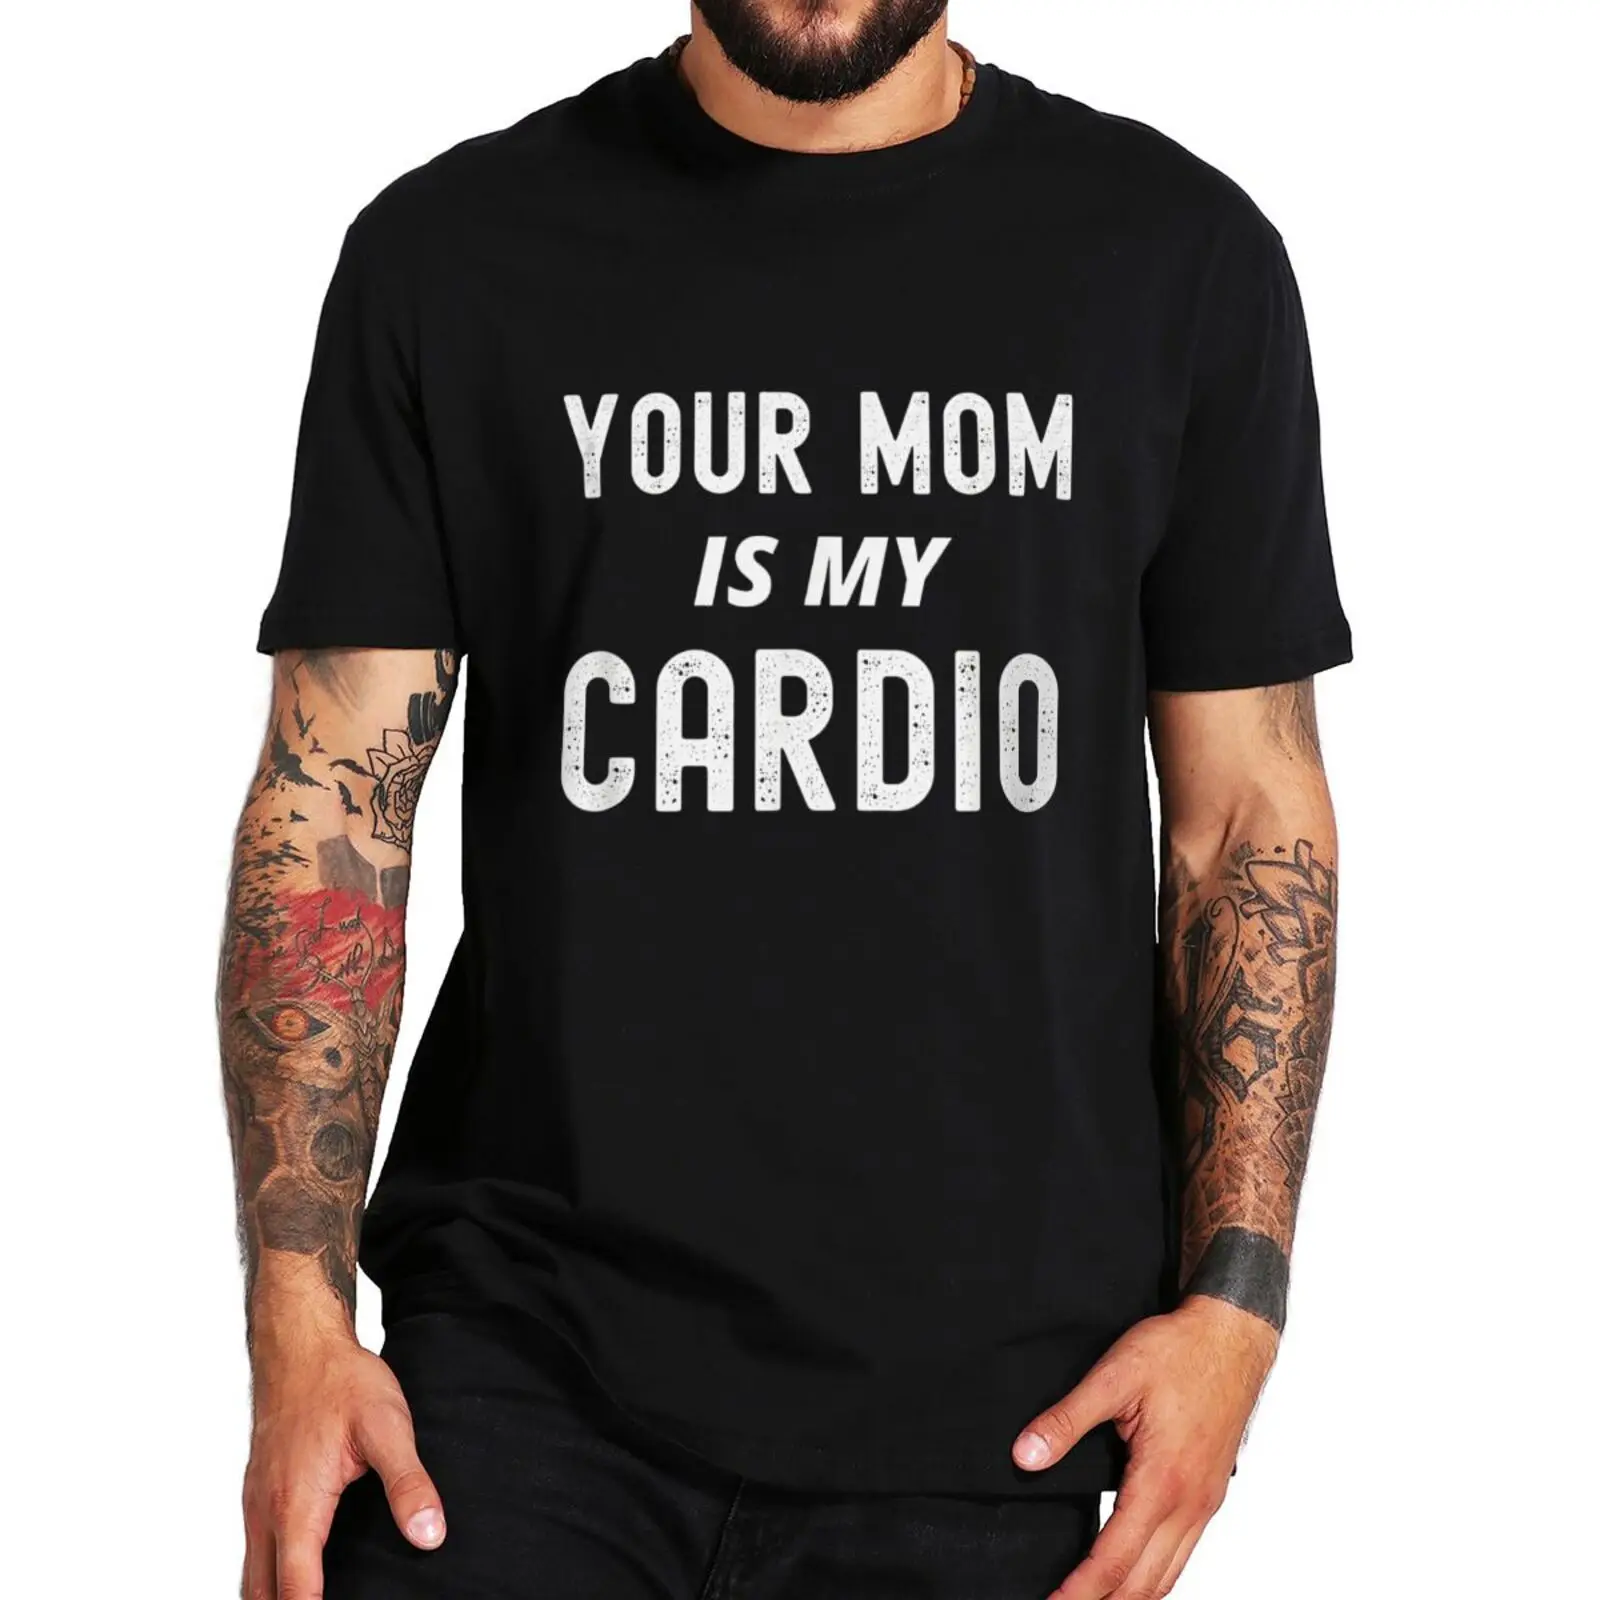 

Your Mom Is My Cardio T Shirt Funny Hot Mom Adult Jokes Sarcastic Quote Gift Men Clothing Summer Cotton Soft T-shirt